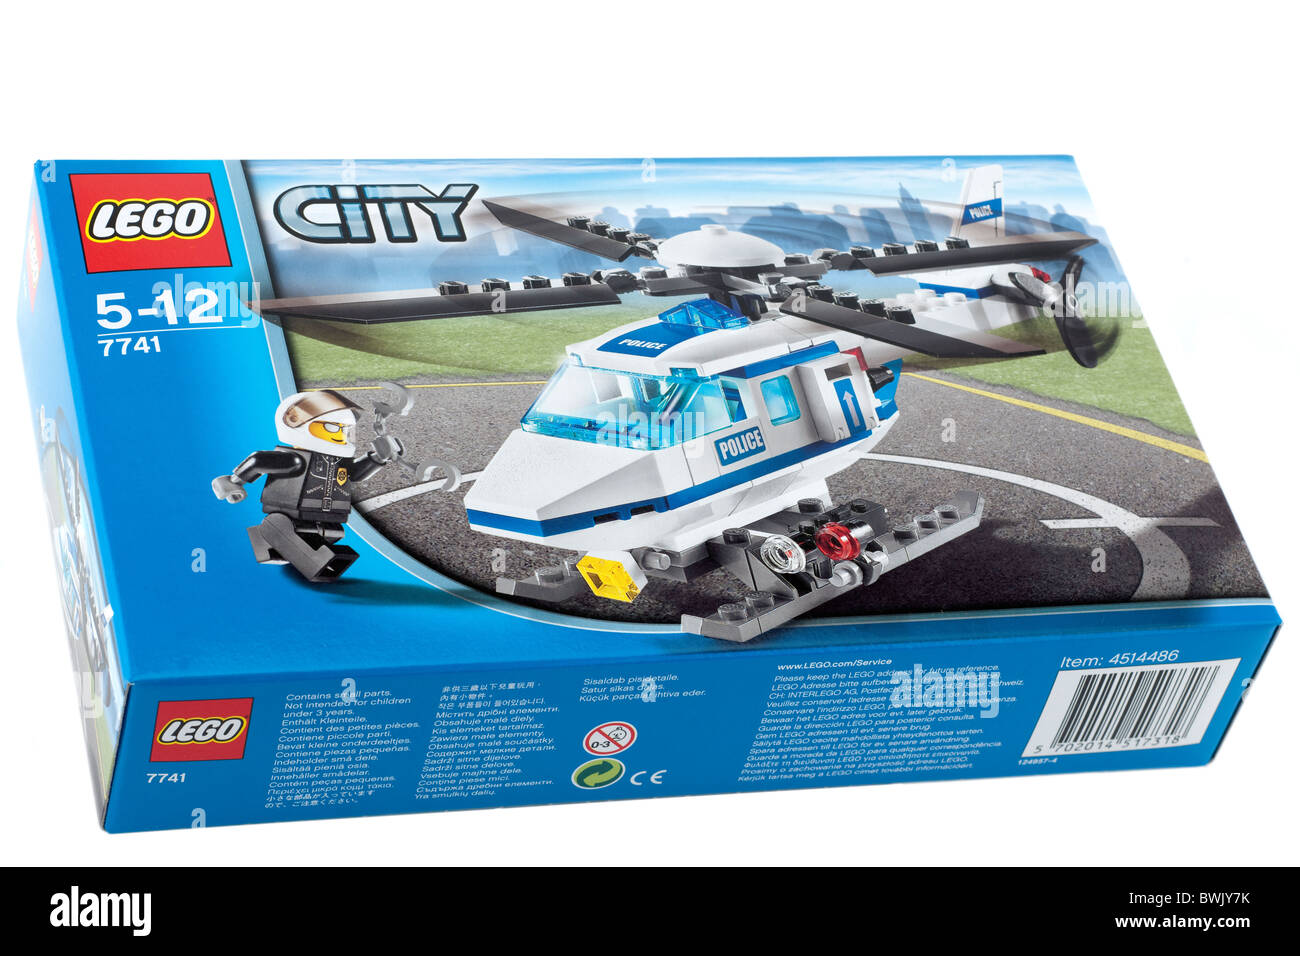 Boxed lego toy police helicopter for children aged 5 to 12 Stock Photo